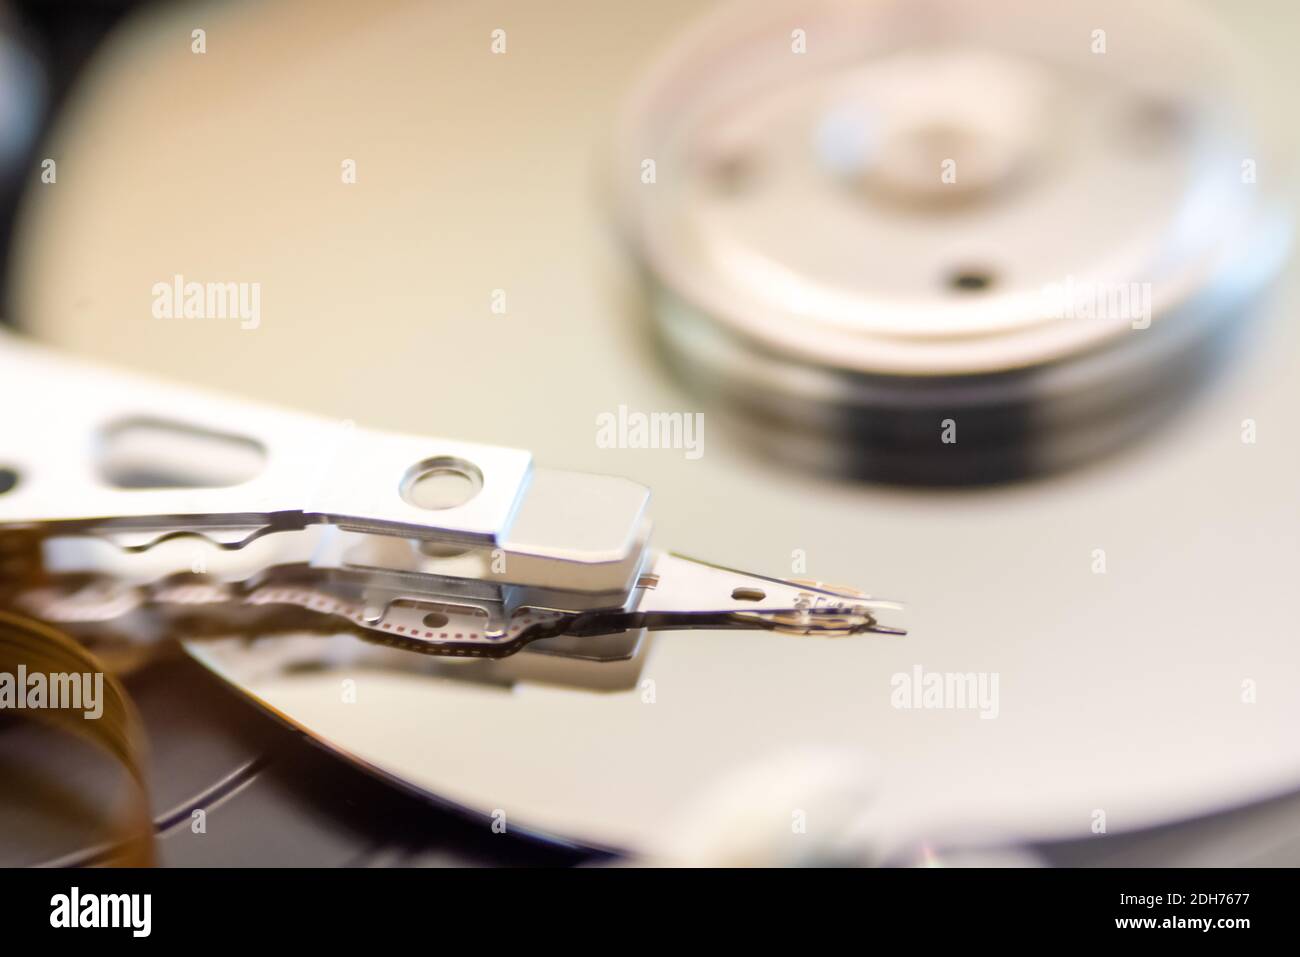 Internal moving parts and electronics of a typical disc hard drive Stock Photo